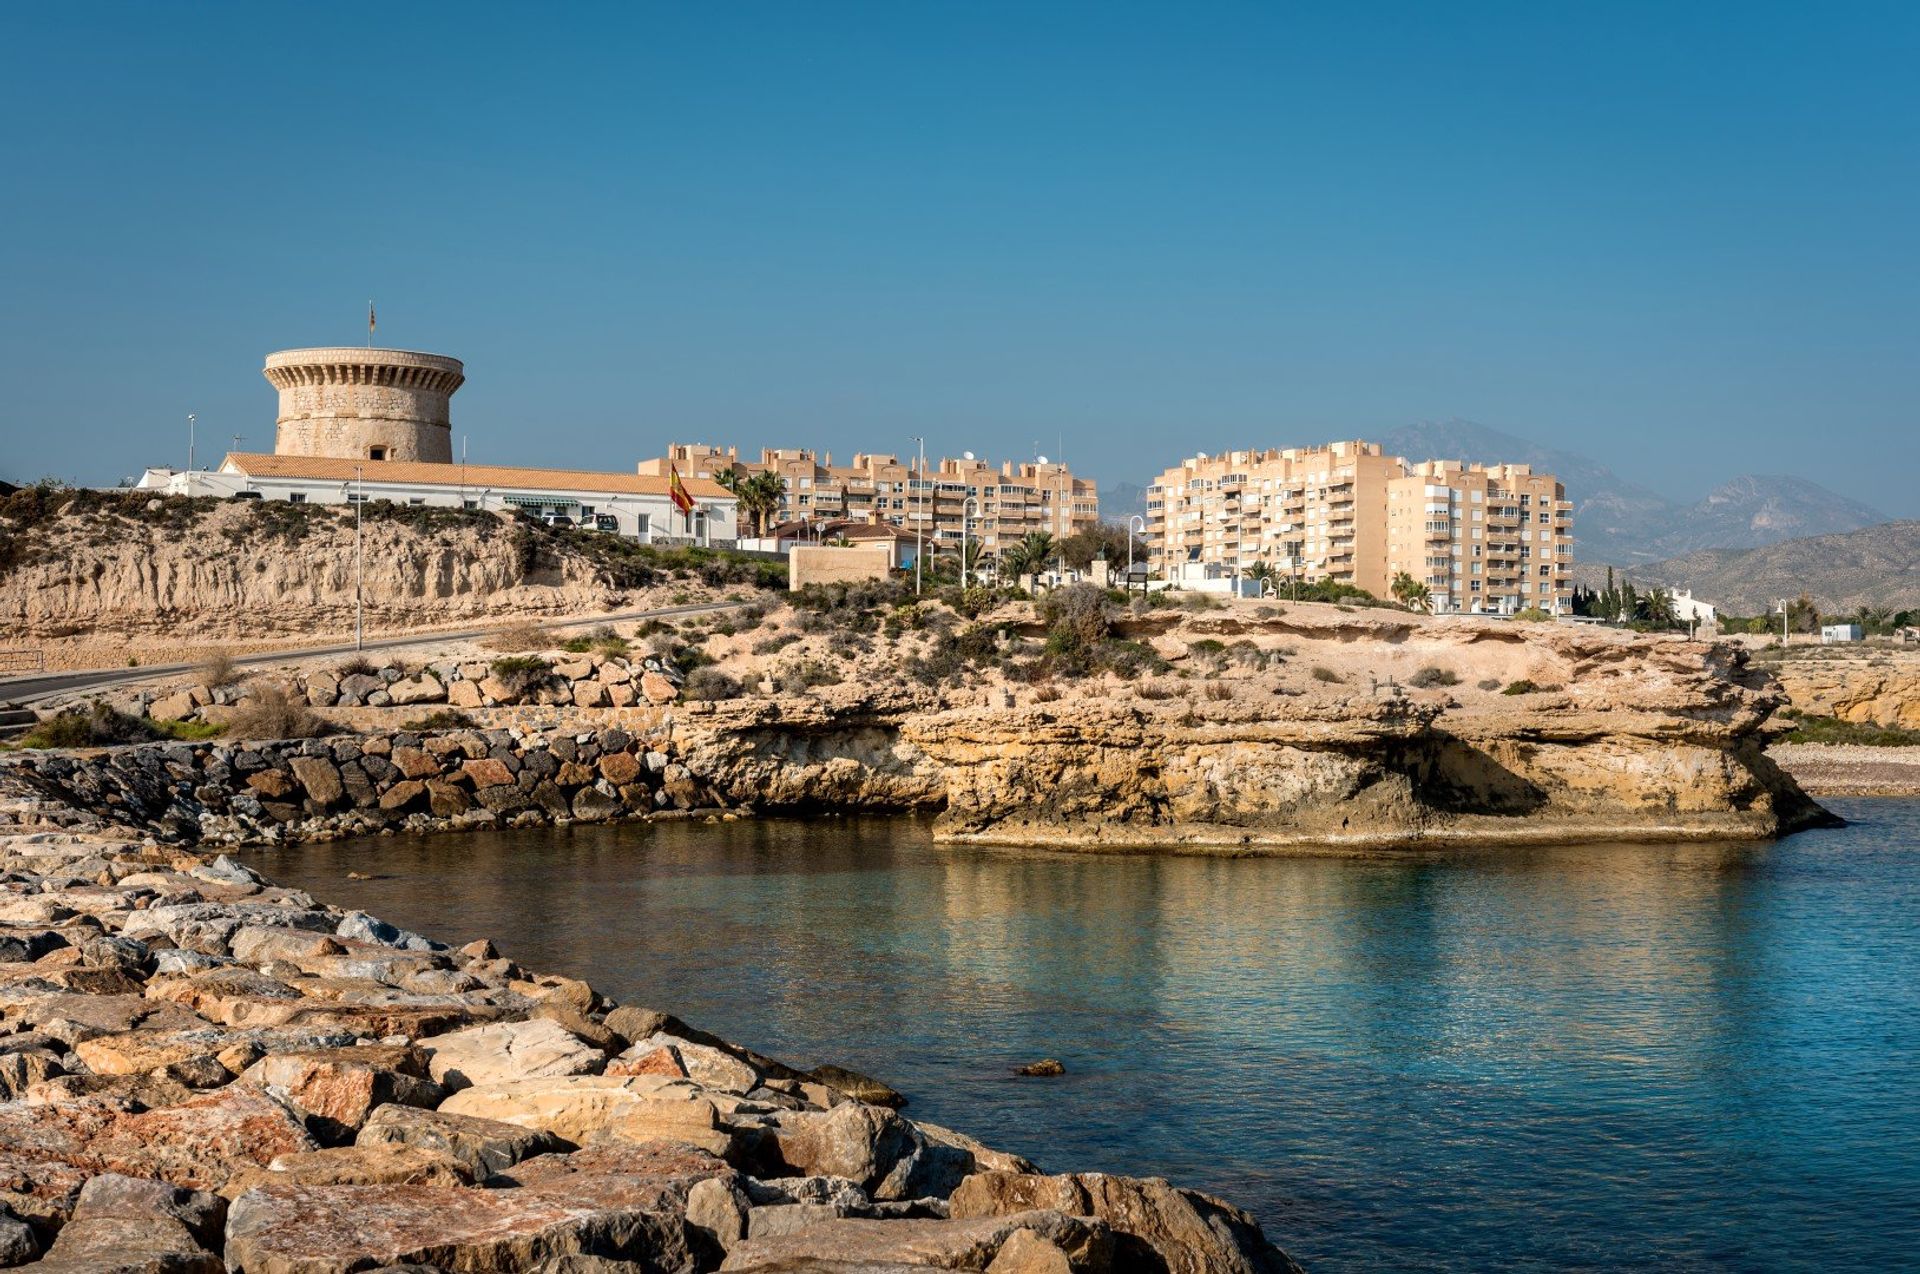 Discover the remnants of the town's medieval past at the 16th century watchtower, the crown jewel of El Campello's marina